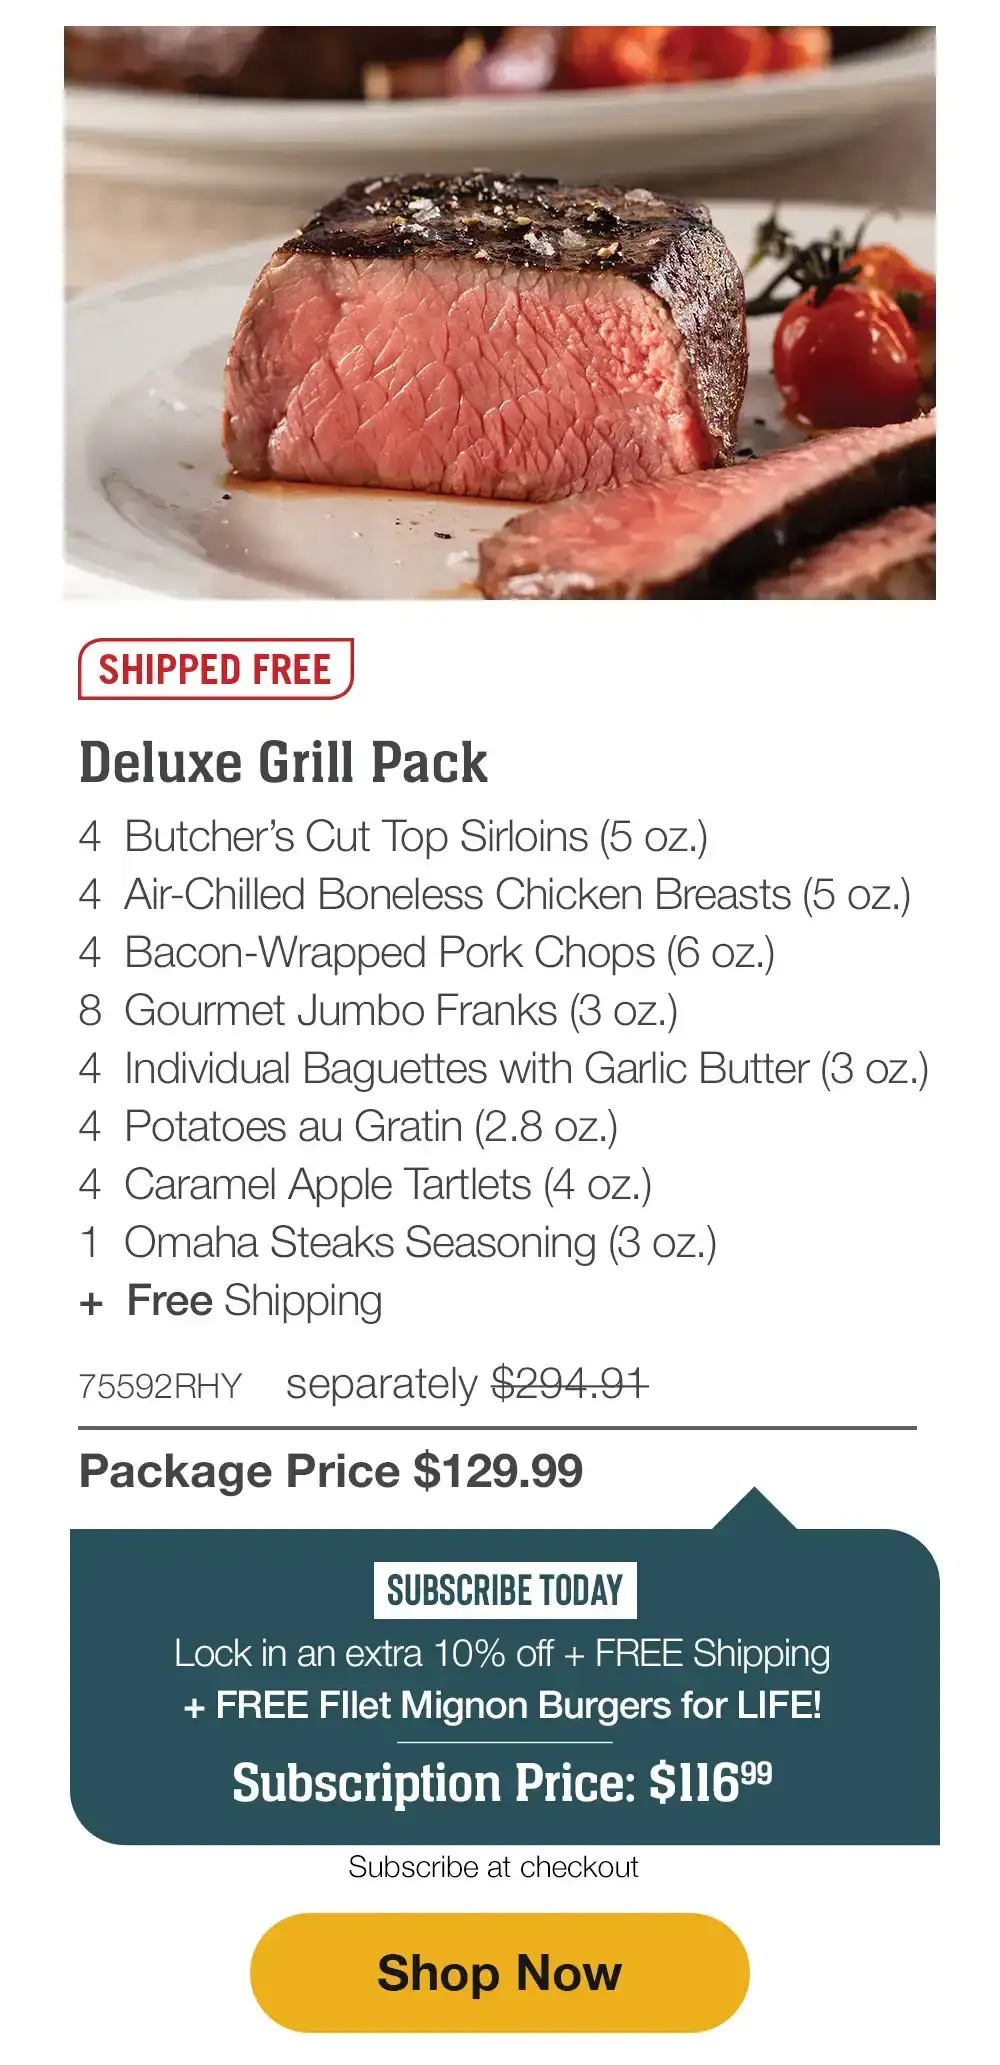 SHIPPED FREE | Deluxe Grill Pack - 4 Butcher's Cut Top Sirloins (5 oz.) - 4 Air-Chilled Boneless Chicken Breasts (5 oz.) - 4 Bacon-Wrapped Pork Chops (6 oz.) - 8 Gourmet Jumbo Franks (3 oz.) - 4 Individual Baguettes with Garlic Butter (3 oz.) - 4 Potatoes au Gratin (2.8 oz.) - 4 Caramel Apple Tartlets (4 oz.) - 1 Omaha Steaks Seasoning (3 oz.) + Free Shipping - 75592RHY separately \\$294.91 | Package Price \\$129.99 | SUBSCRIBE TODAY - Lock in an extra 10% off + FREE Shipping + FREE Fllet Mignon Burgers for LIFE! Subscription Price: \\$116.99 | Subscribe at checkout || Shop Now